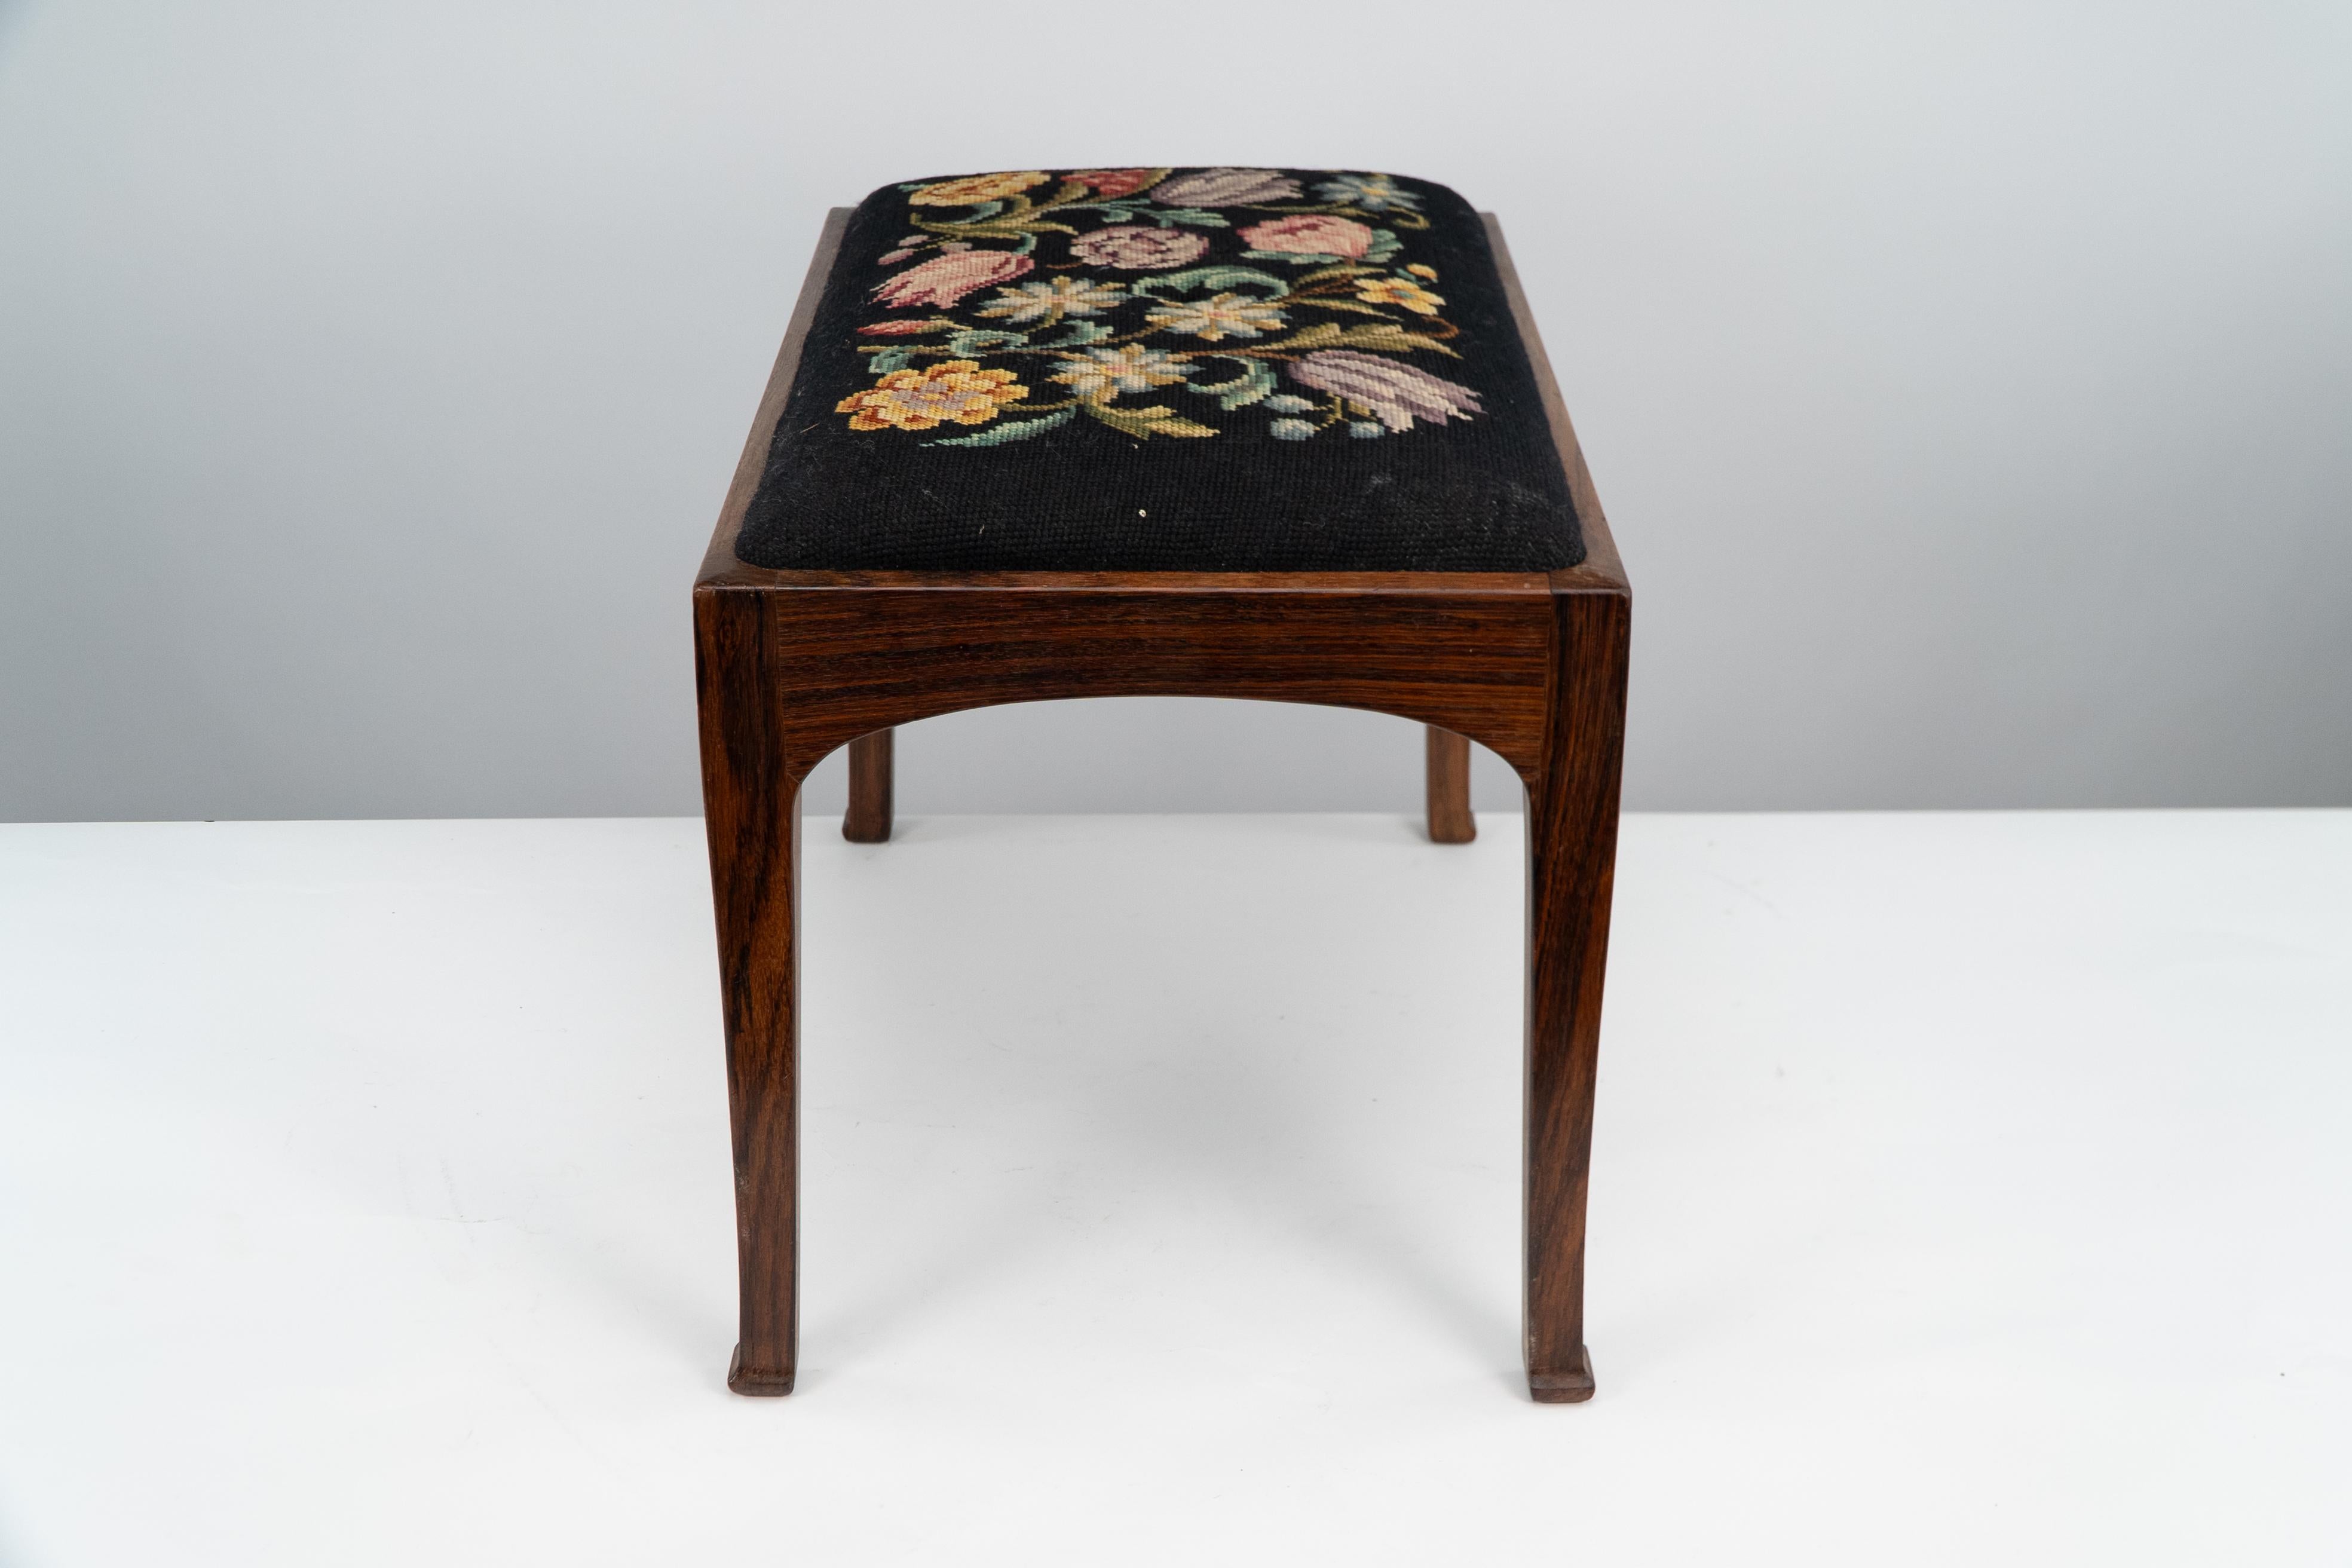 English Edward Barnsley. A Cotswold School walnut stool with the original tapestry seat. For Sale